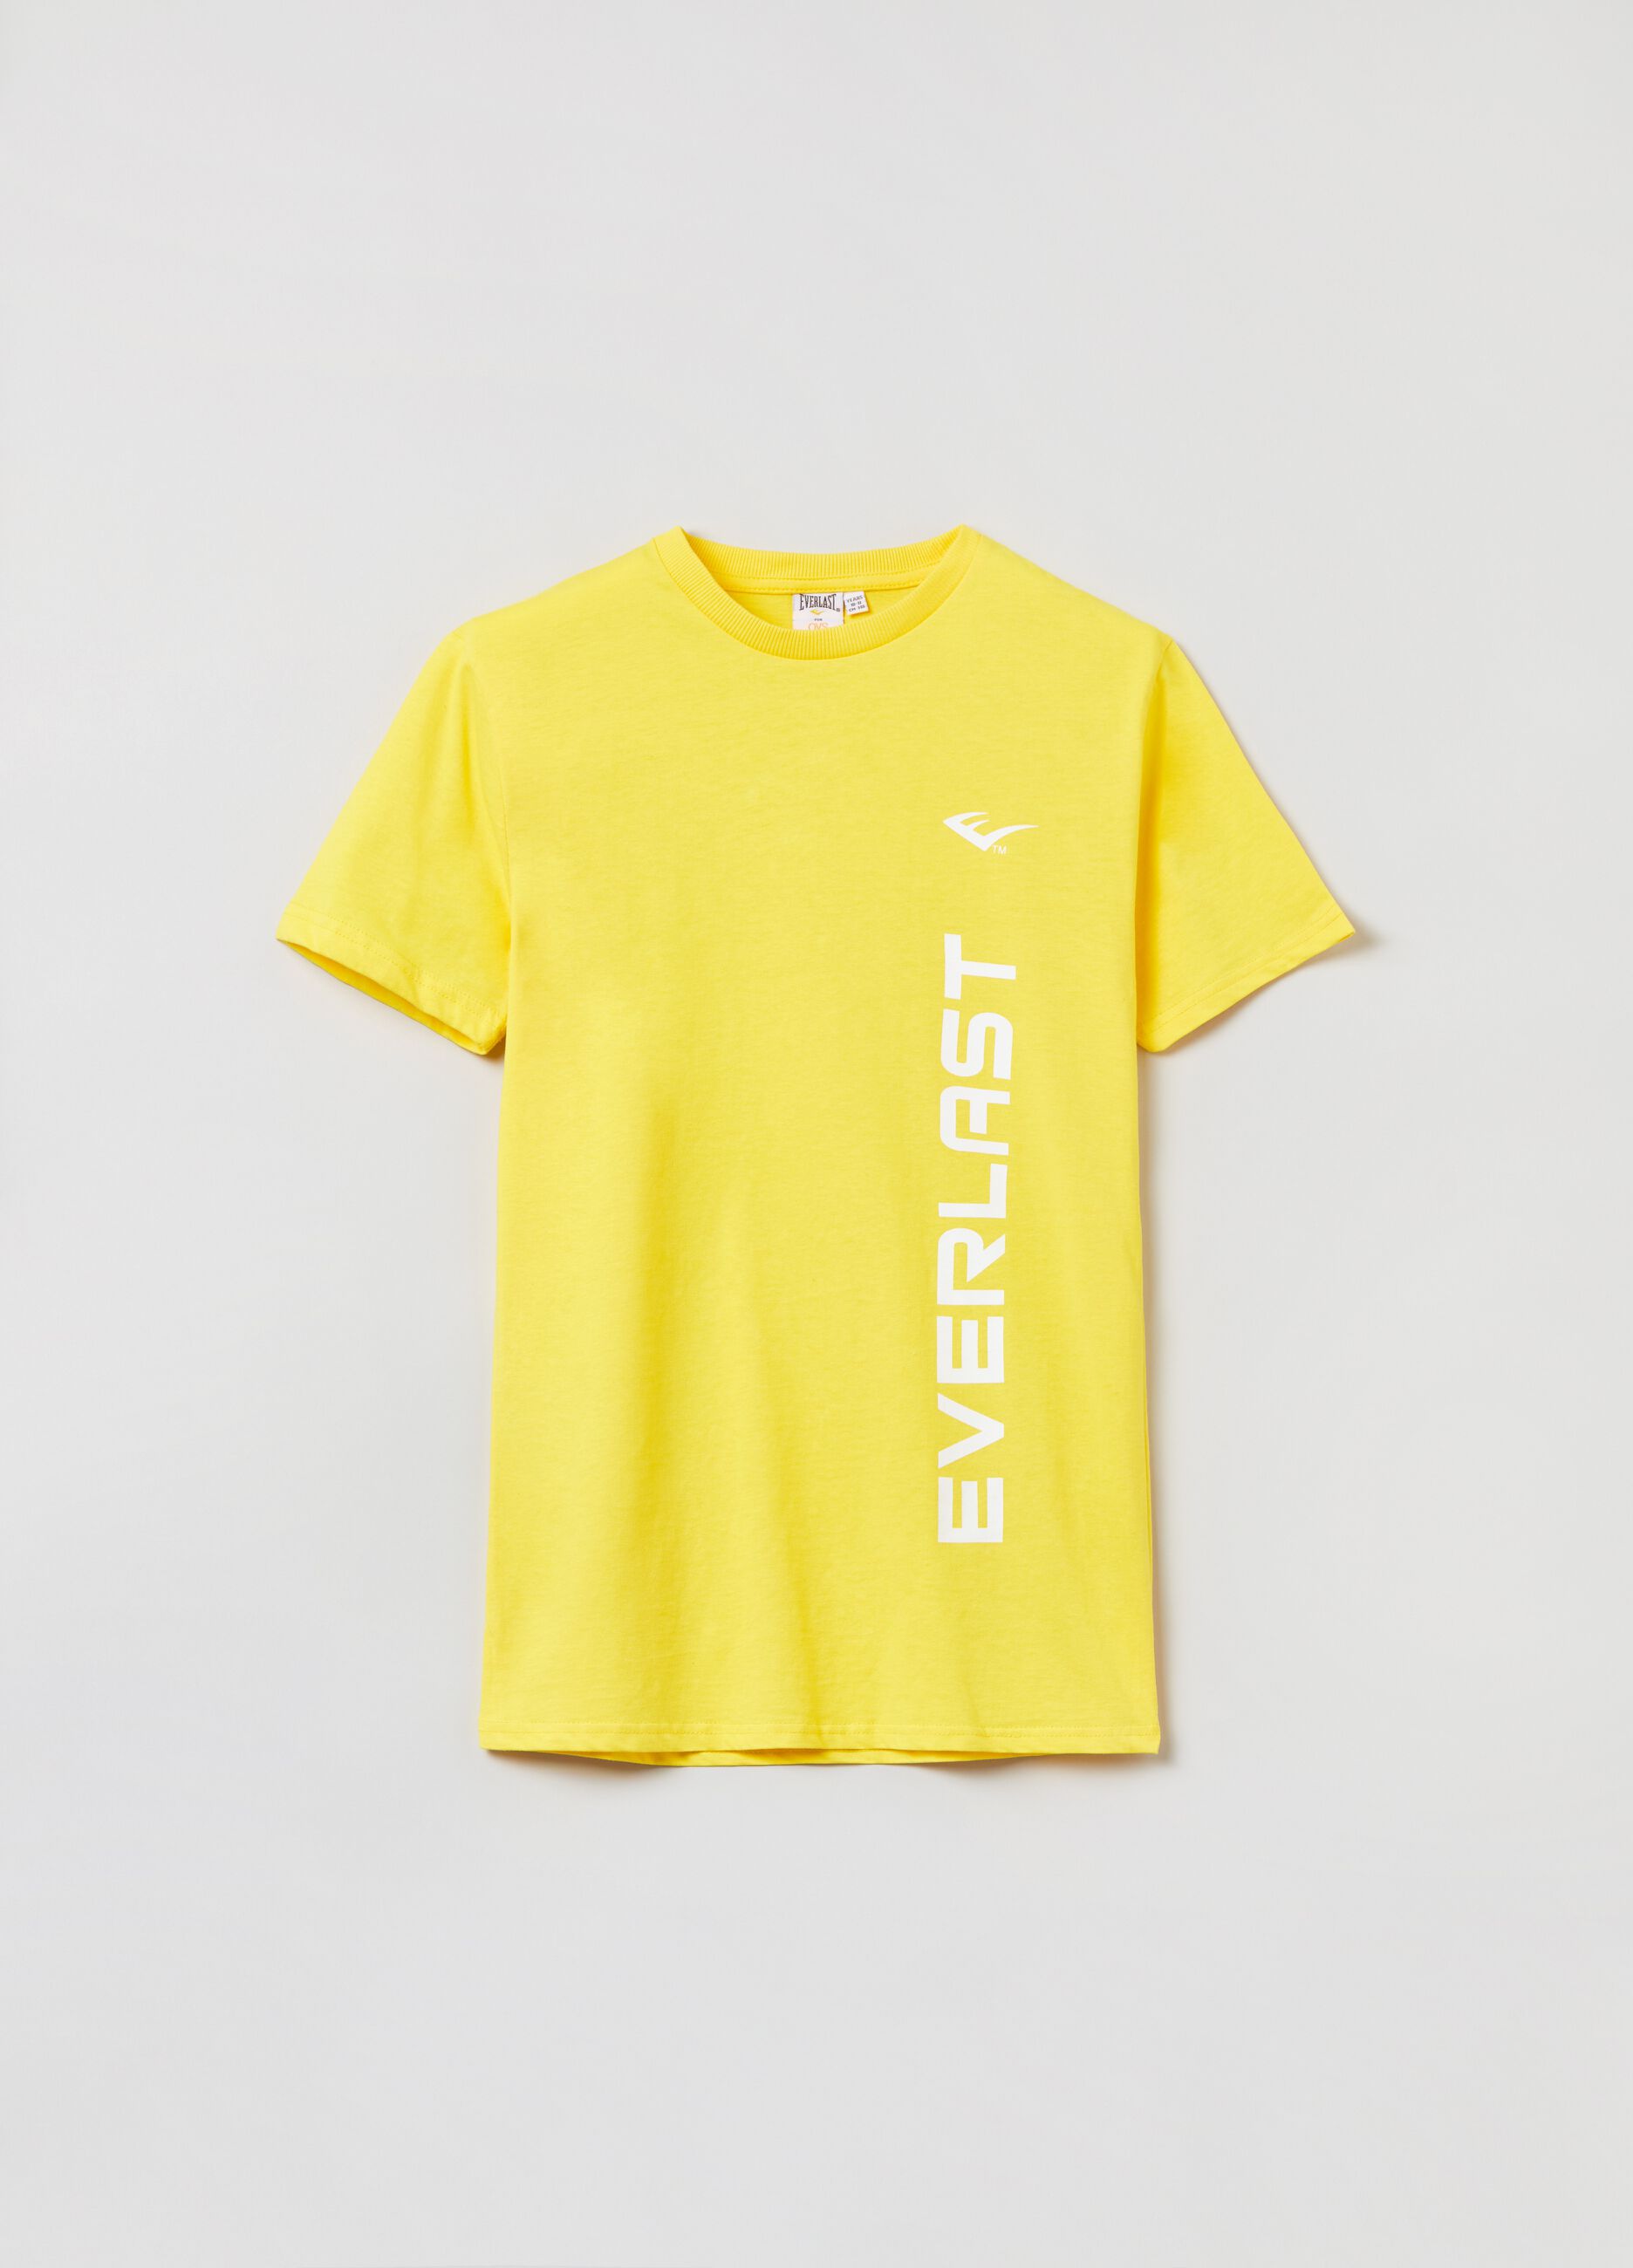 Cotton T-shirt with Everlast print